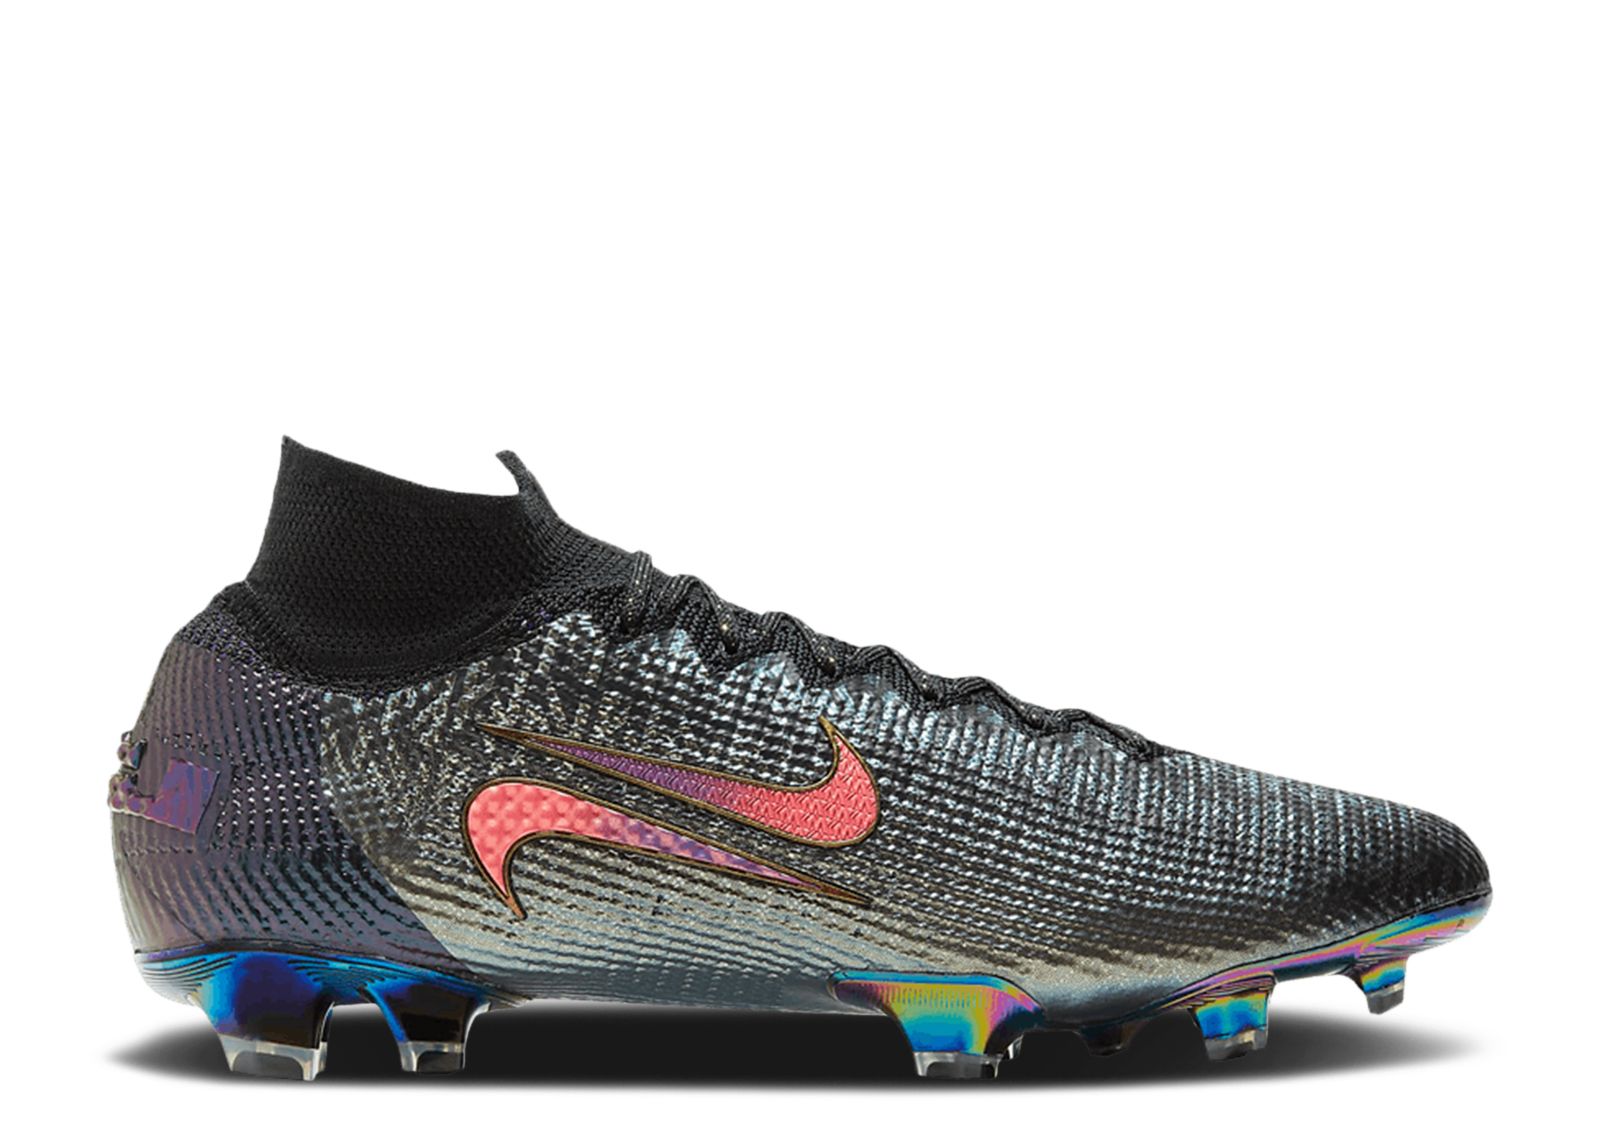 new arrival copa 20 fg mens soccer shoes 19 black mercurial superfly football boots boys outdoor sports mundial cleats ef8309 Кроссовки Nike Kylian Mbappé X Mercurial Superfly 7 Elite Fg 'The Chosen 2', серый